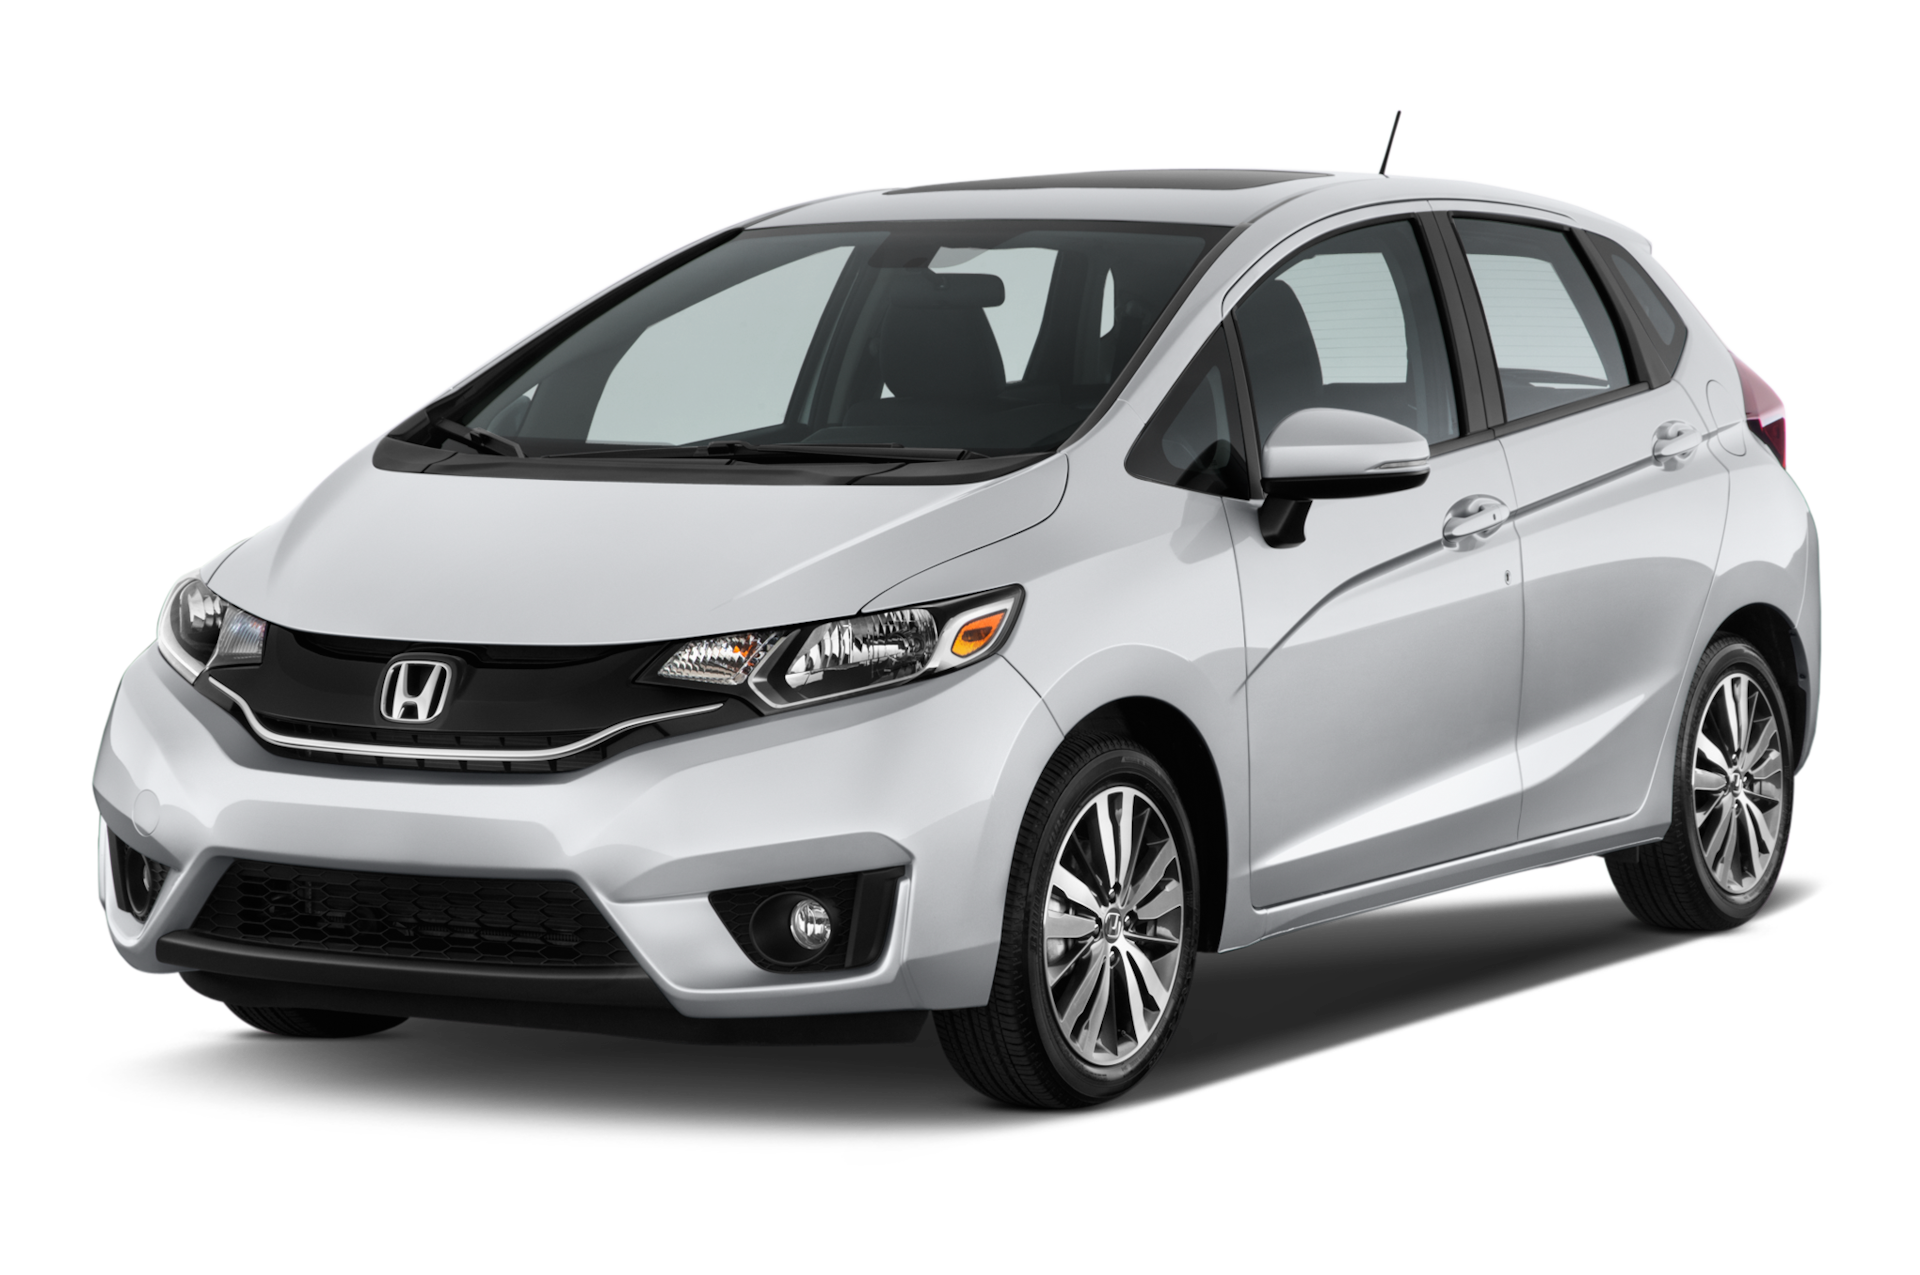 2016 Honda Fit Prices, Reviews, and Photos - MotorTrend